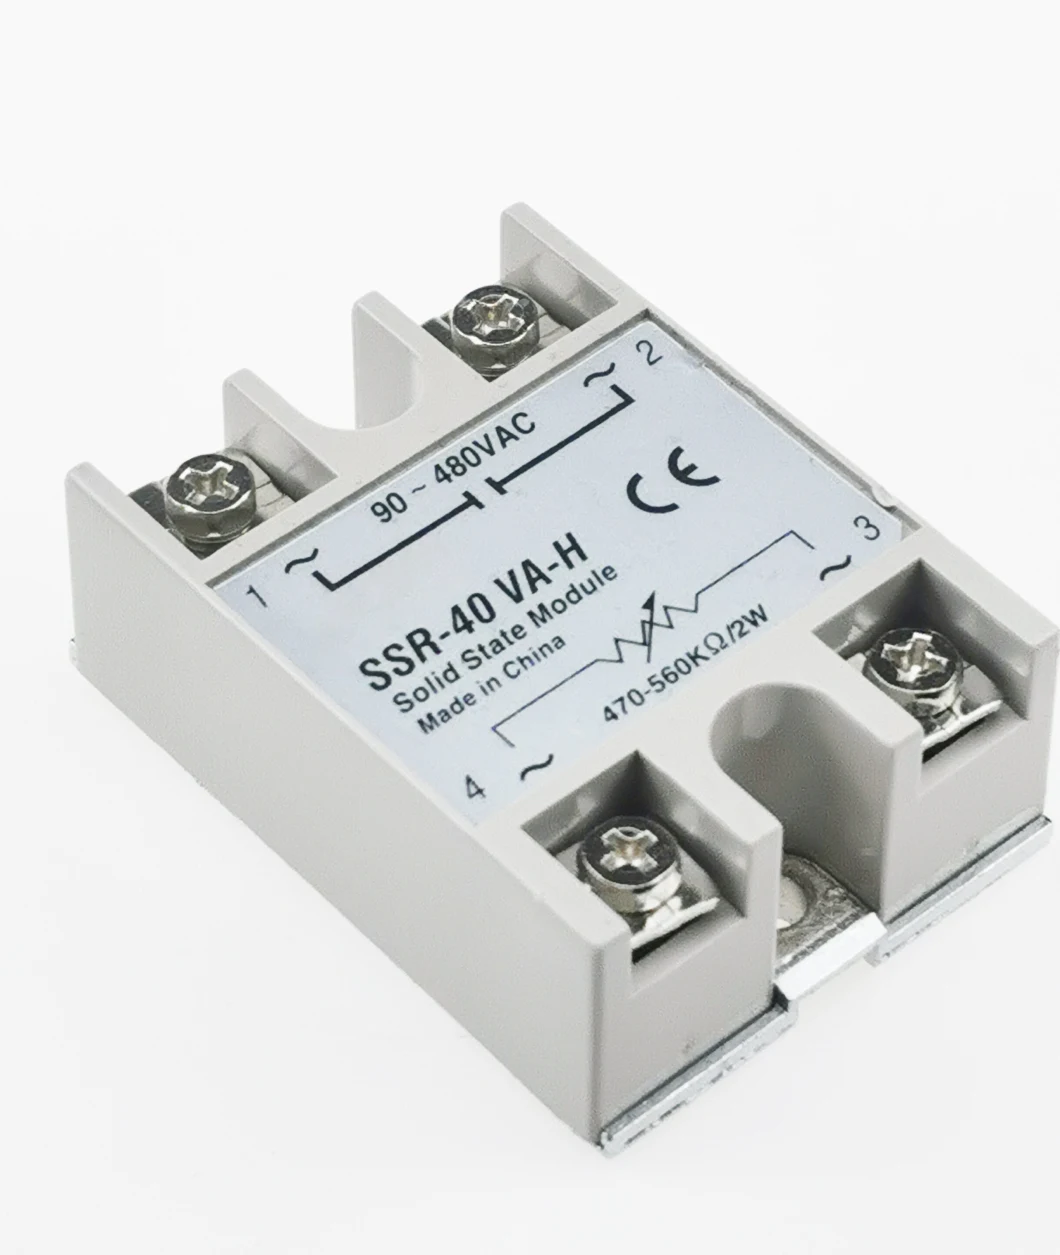 SSR-40da Solid State Relay, CE Proved Solid State Relay, 24-380VAC Single Solid State Relay, ISO9001 Passed Solid State Relay